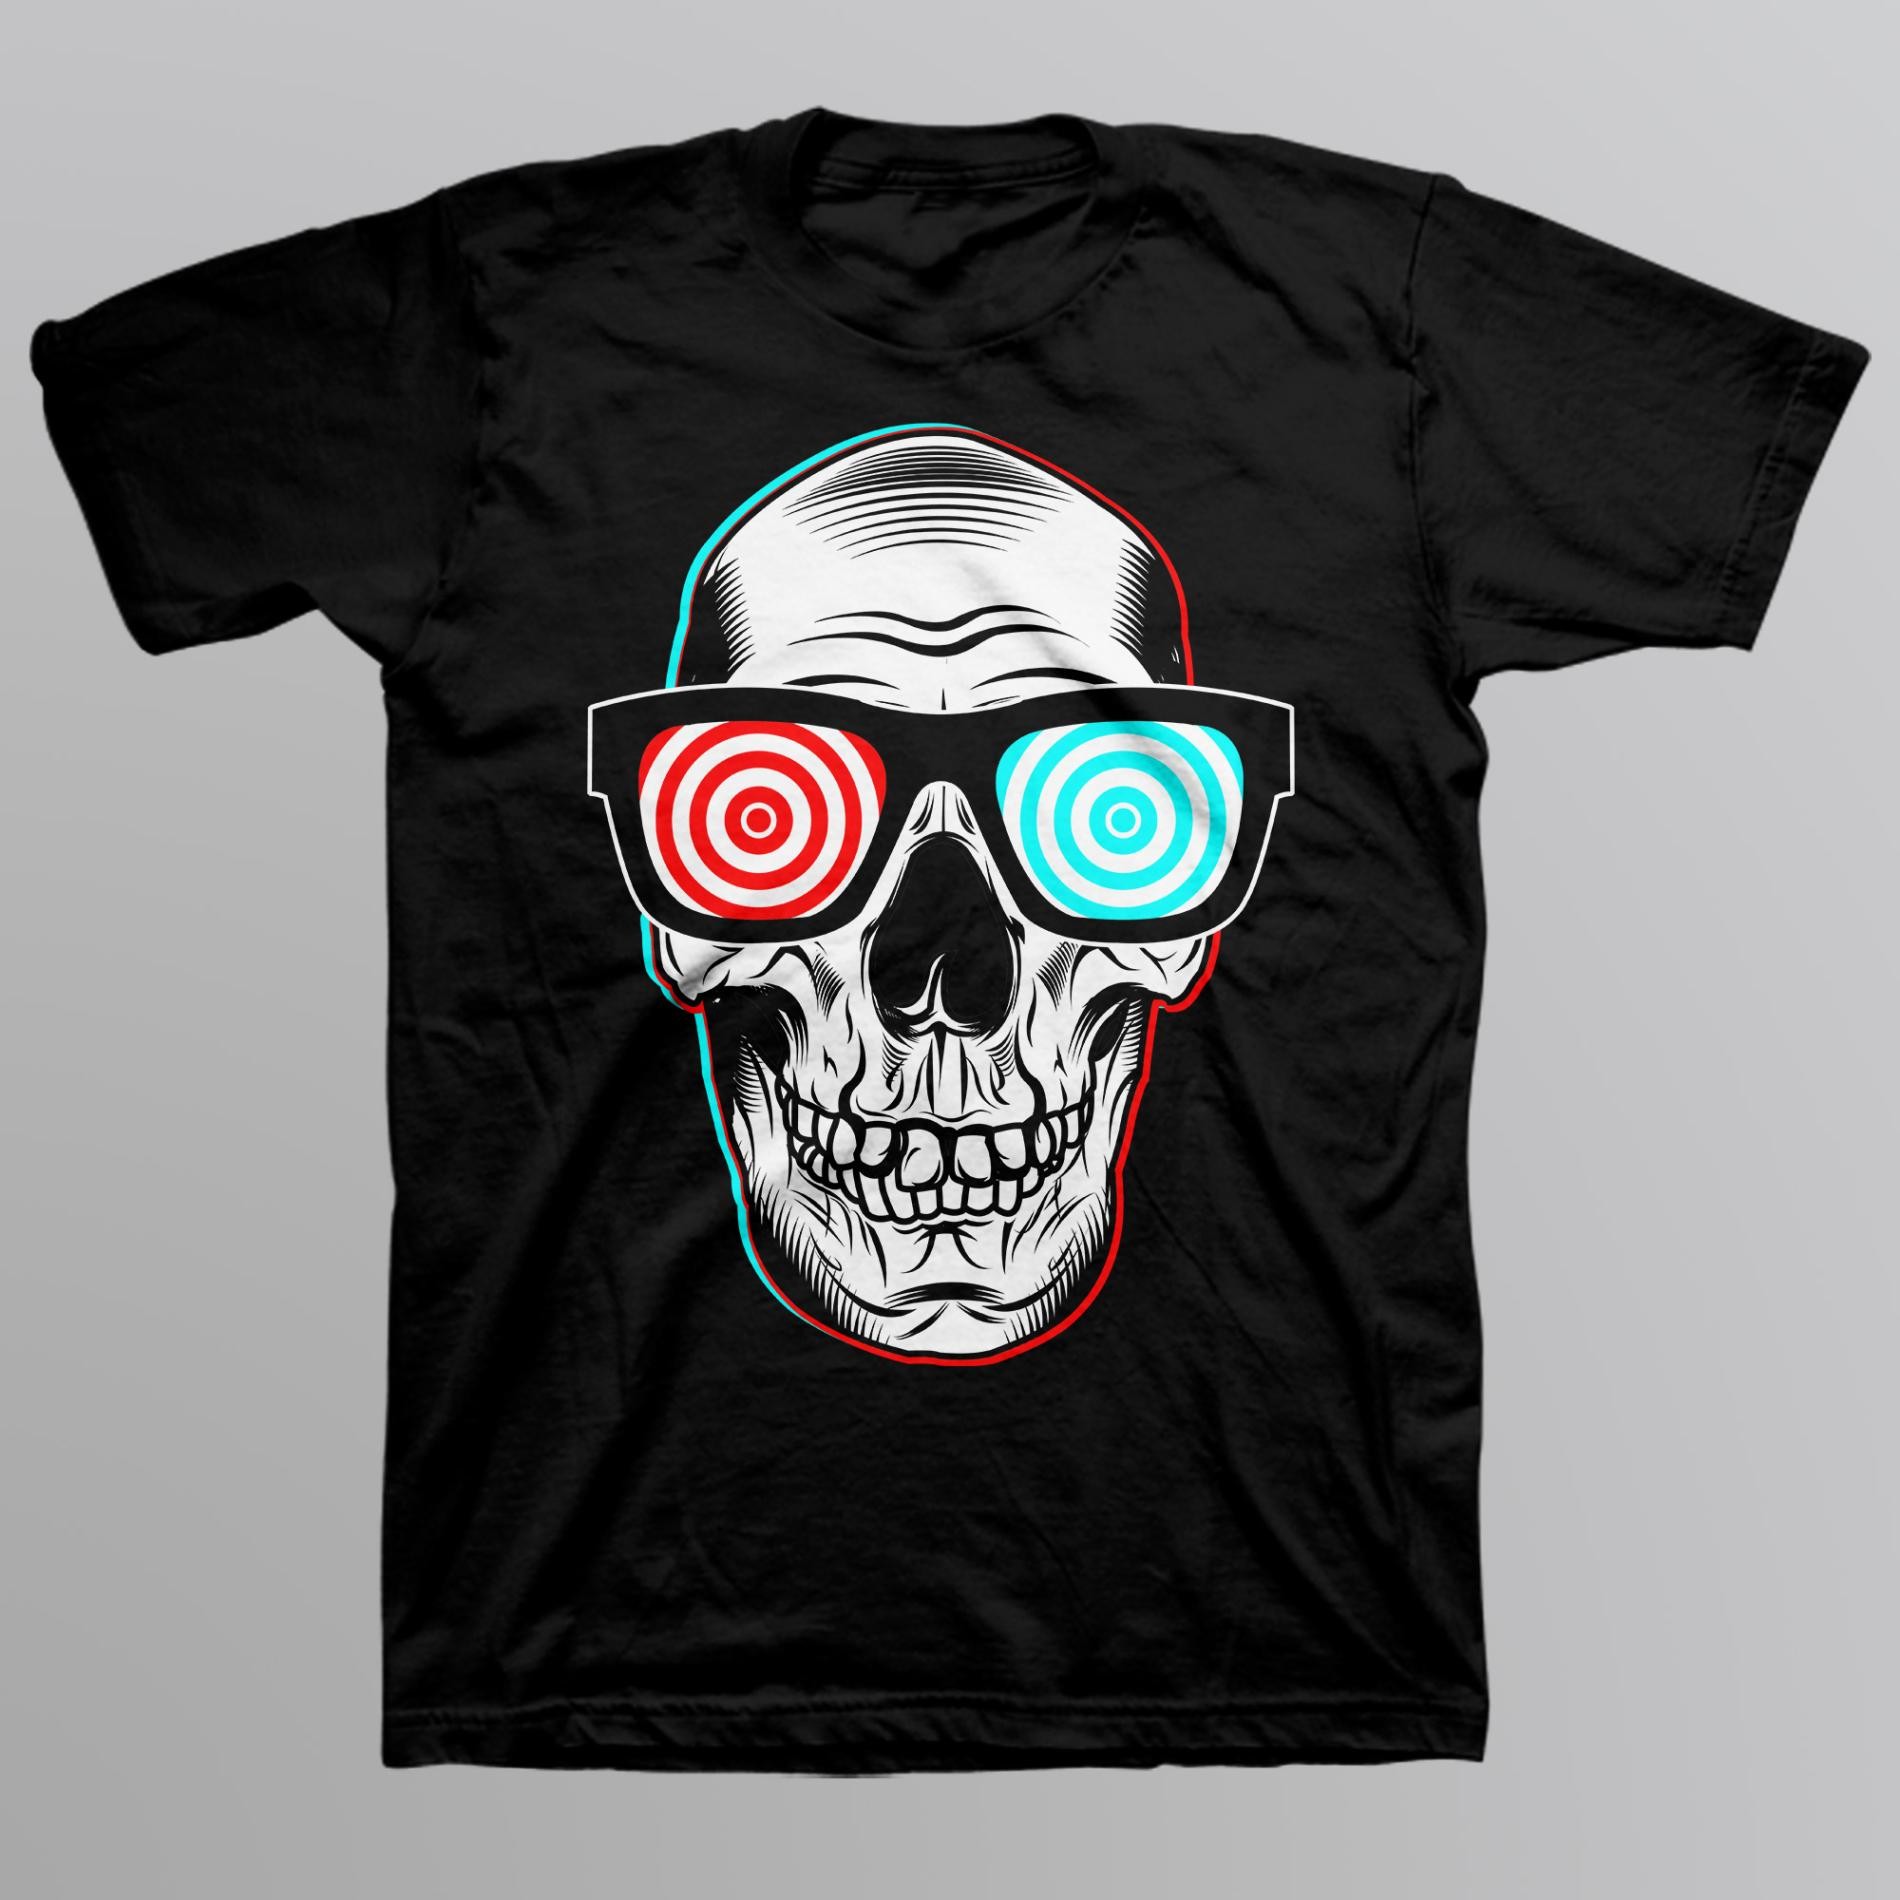 Route 66 Boy's Graphic T-Shirt - Spiral Shades Skull